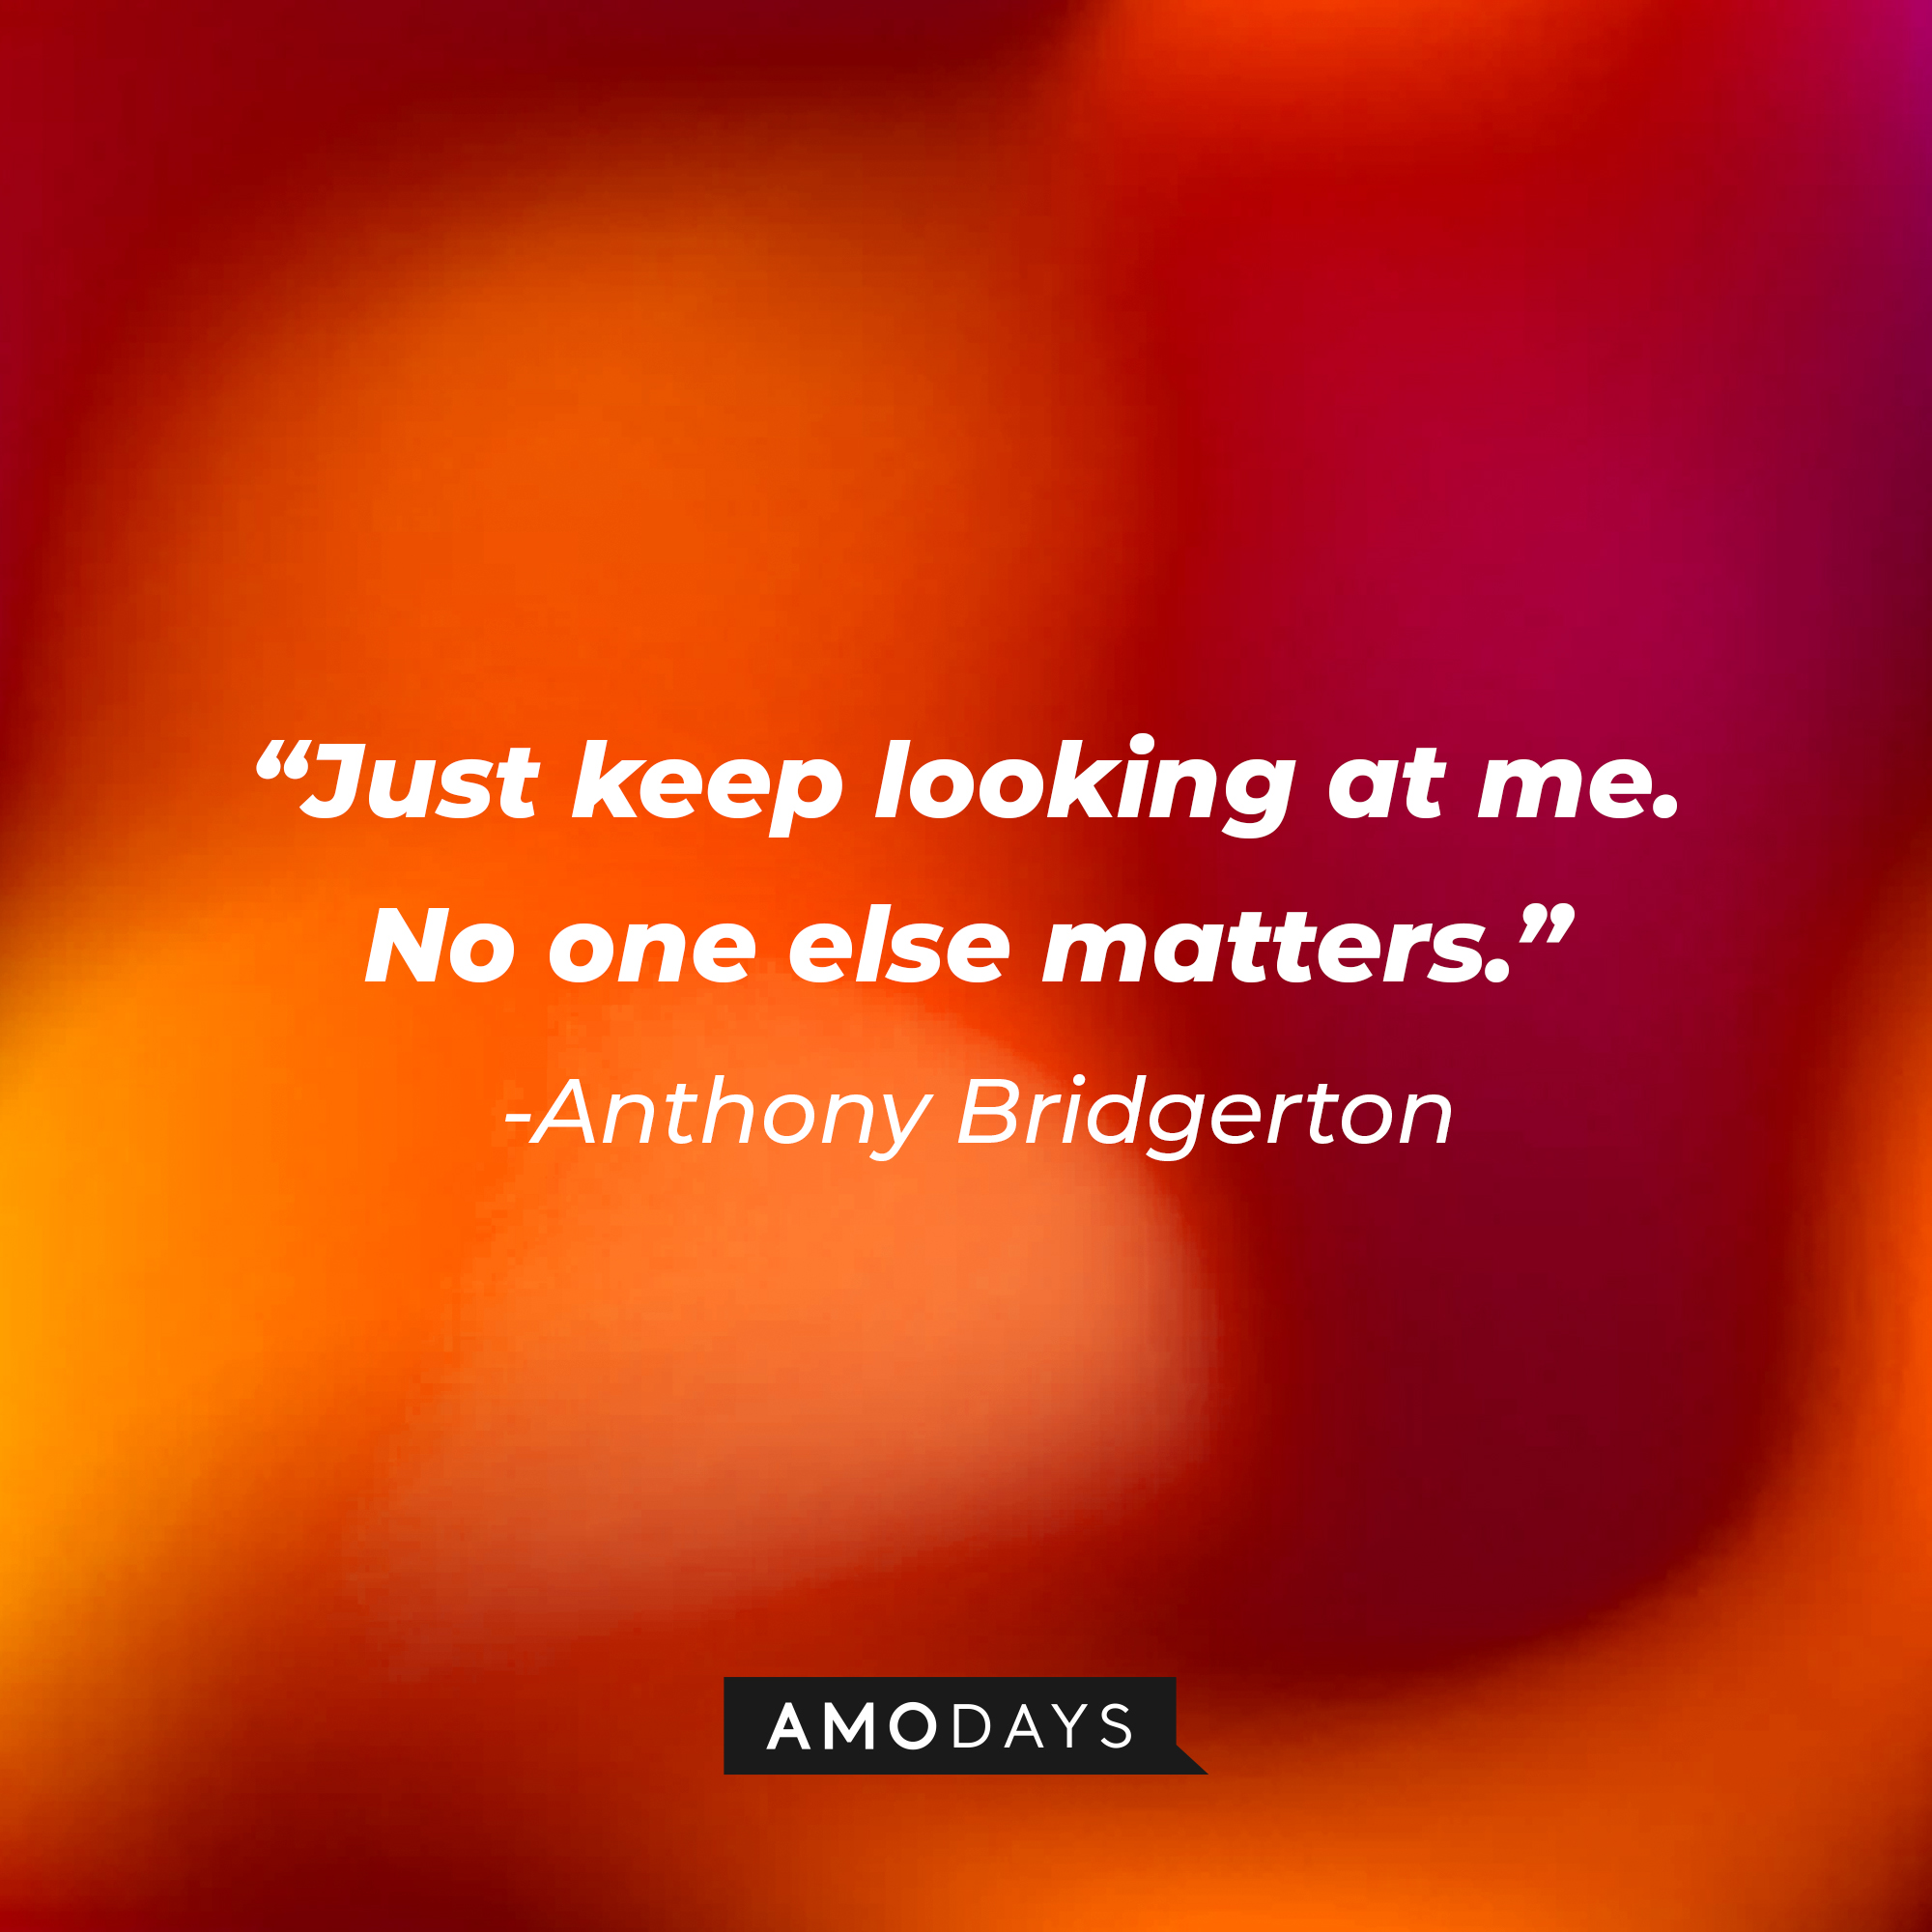 Anthony Bridgerton's quote: "Just keep looking at me. No one else matters." | Source: AmoDays